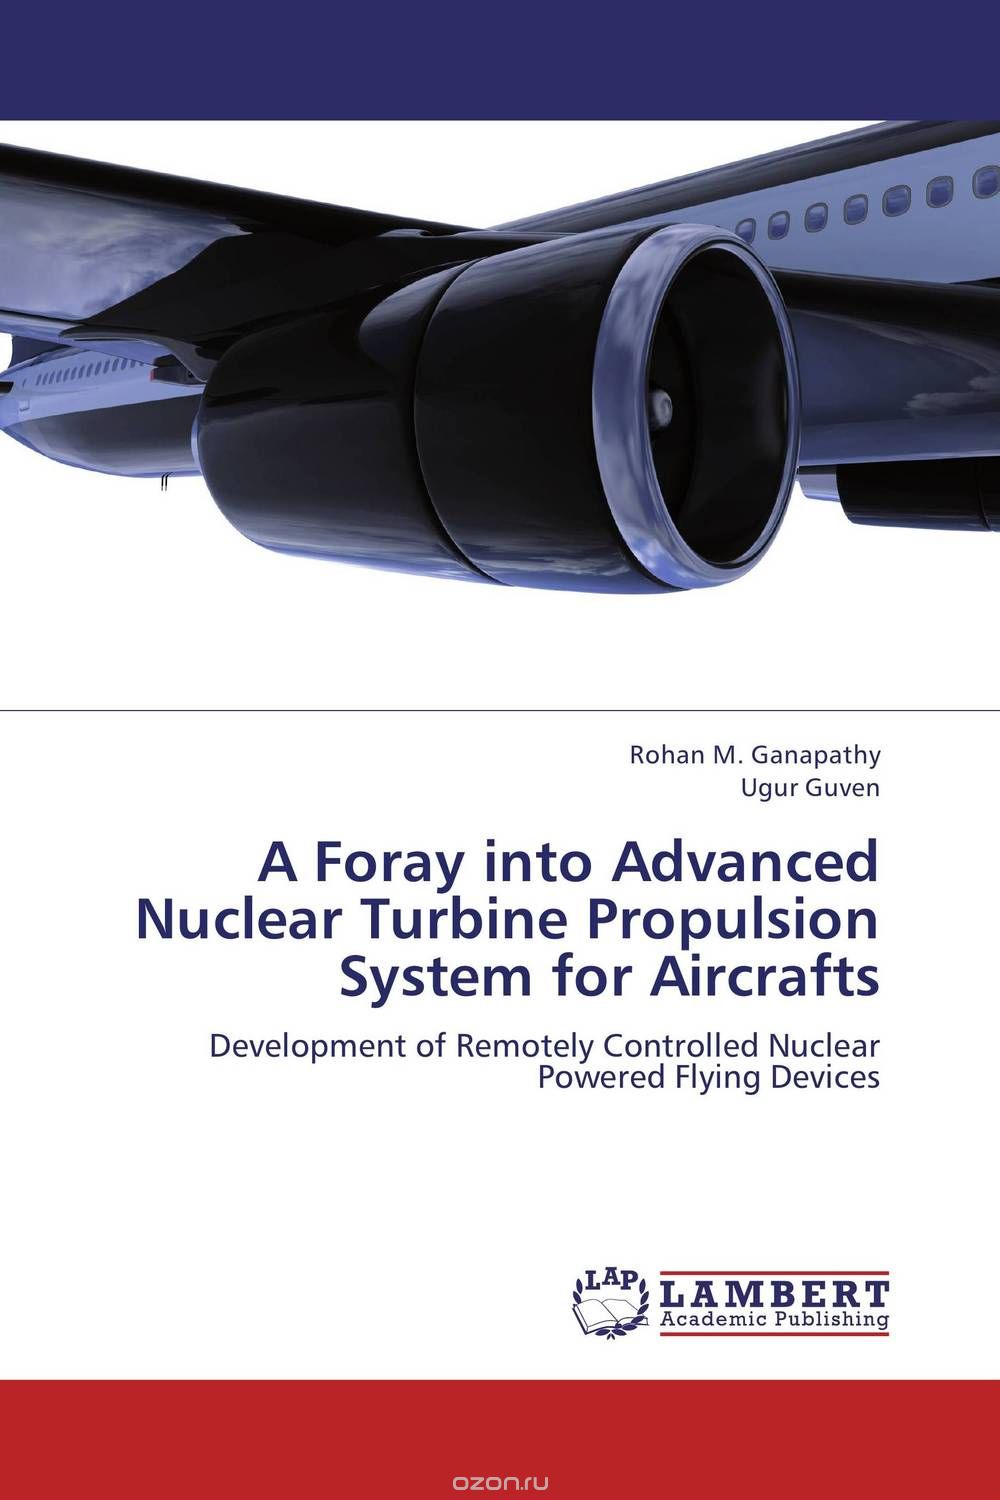 Скачать книгу "A Foray into Advanced Nuclear Turbine Propulsion System for Aircrafts"